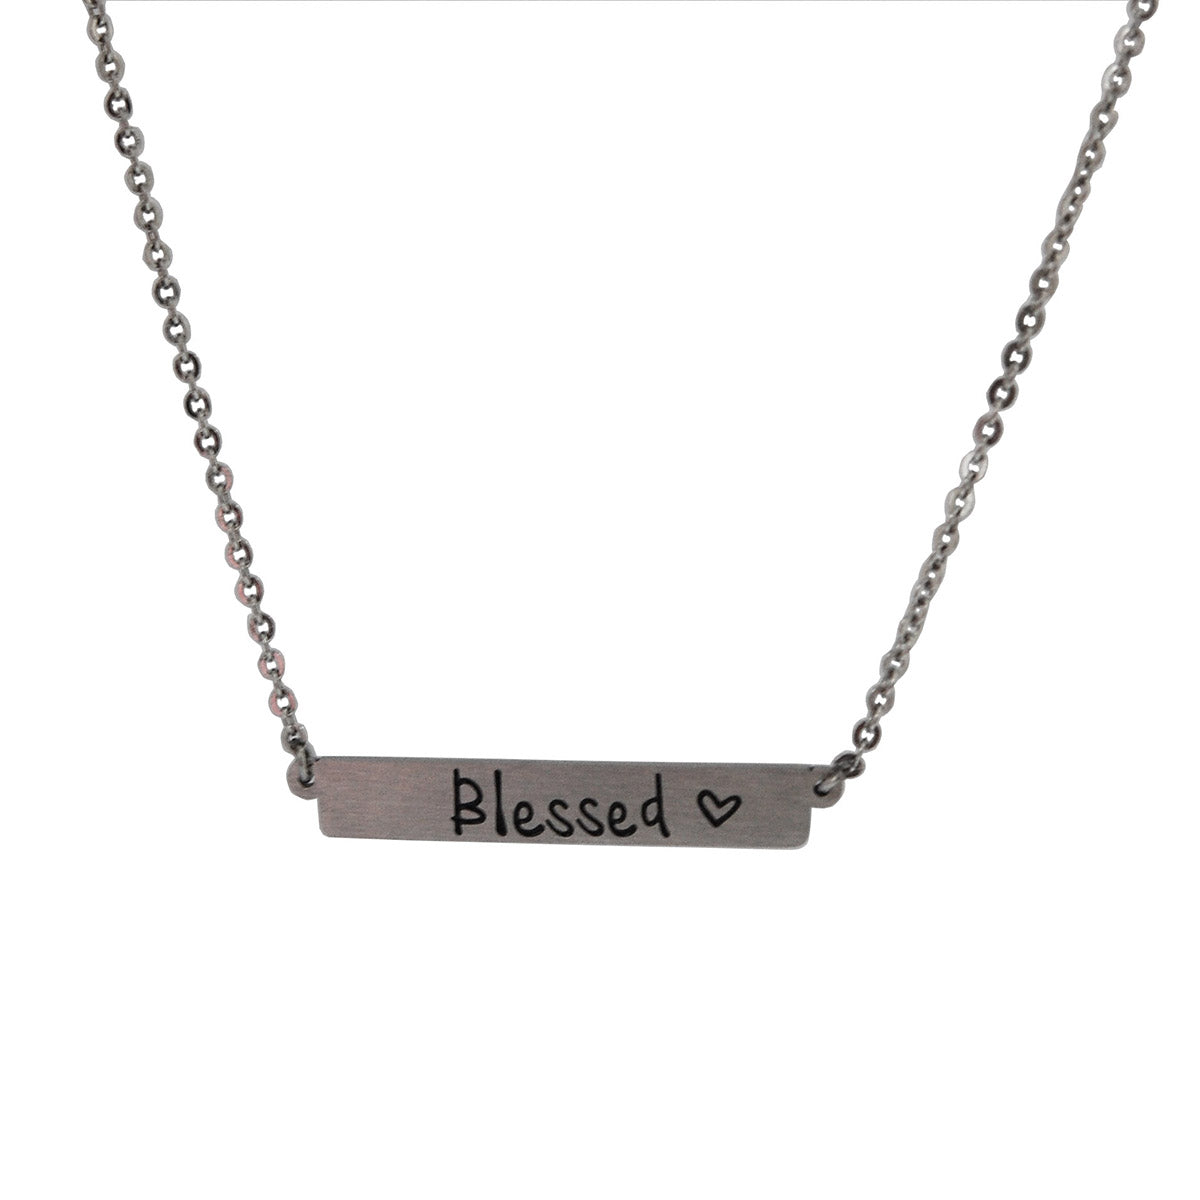 ESN 5353: "I Am Blessed" Bar Necklace w/ 18" + 2" Chain